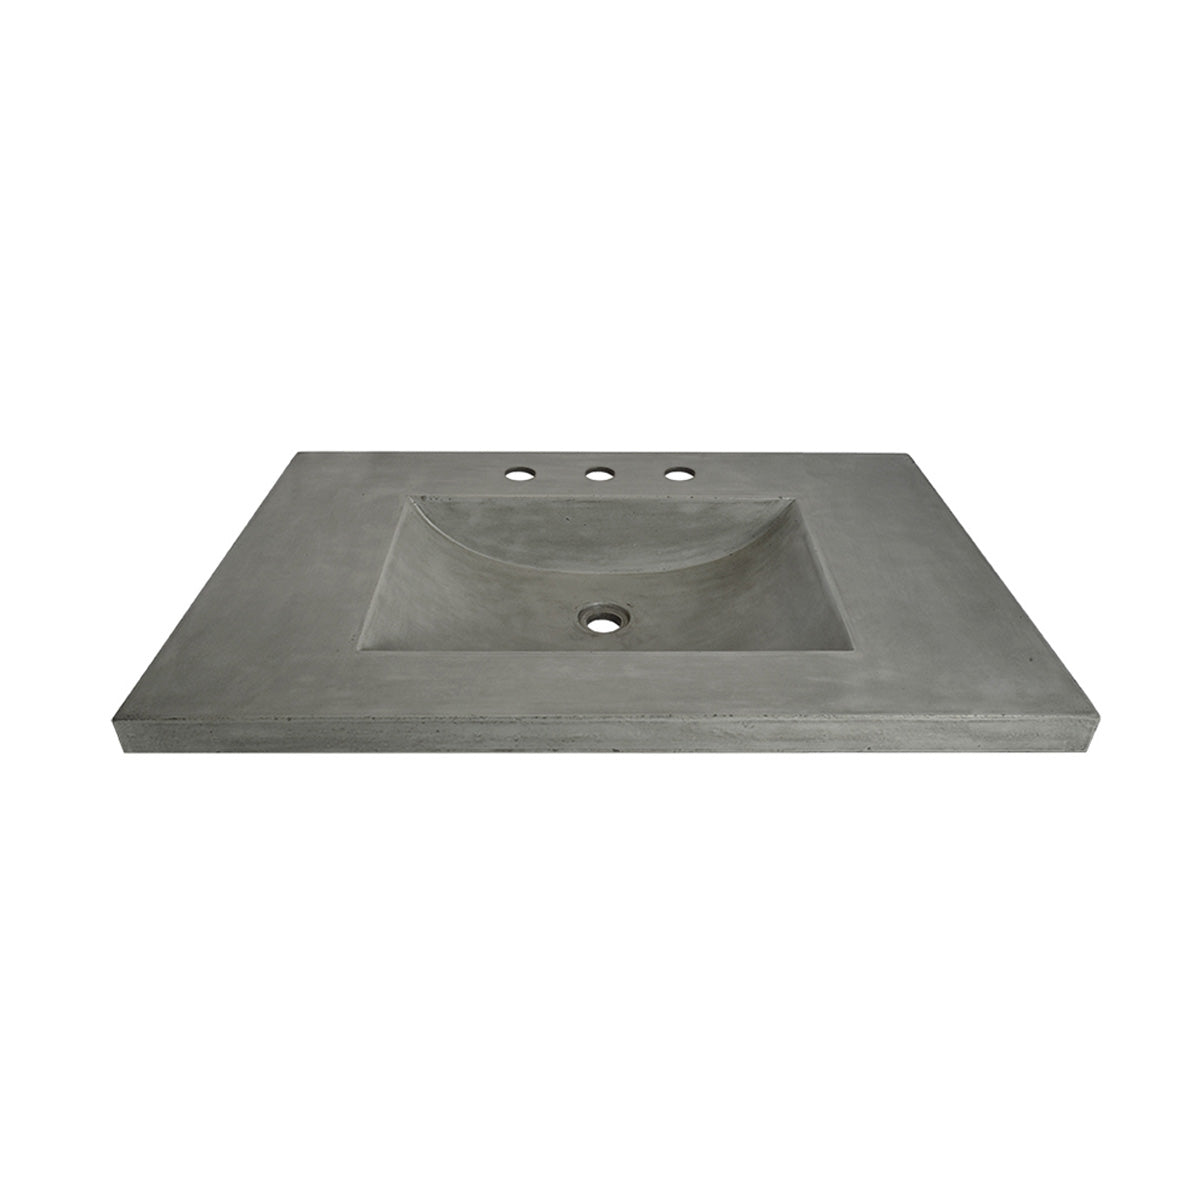 https://www.plumbingoverstock.com/cdn/shop/products/NSVNT30-A-30-Palomar-Vanity-Top-with-Integral-Sink-in-Ash-s_d4113a6c-eb1f-401e-bf9d-b71967b547a6.jpg?v=1605745544